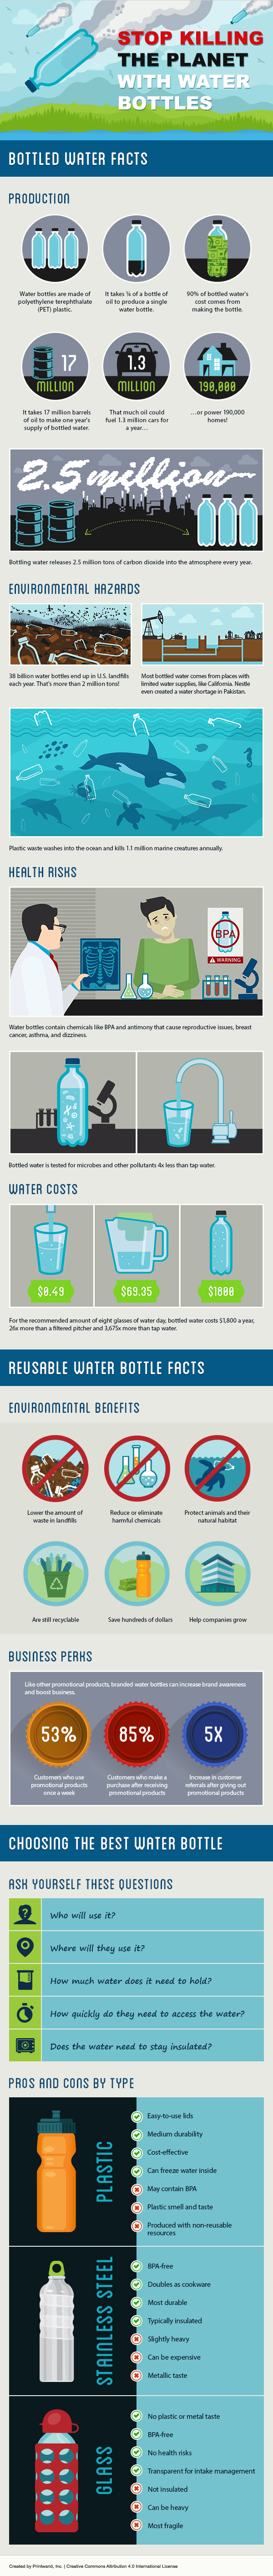 plastic-water-bottle-pollution-infographic-facts-environmental-effects